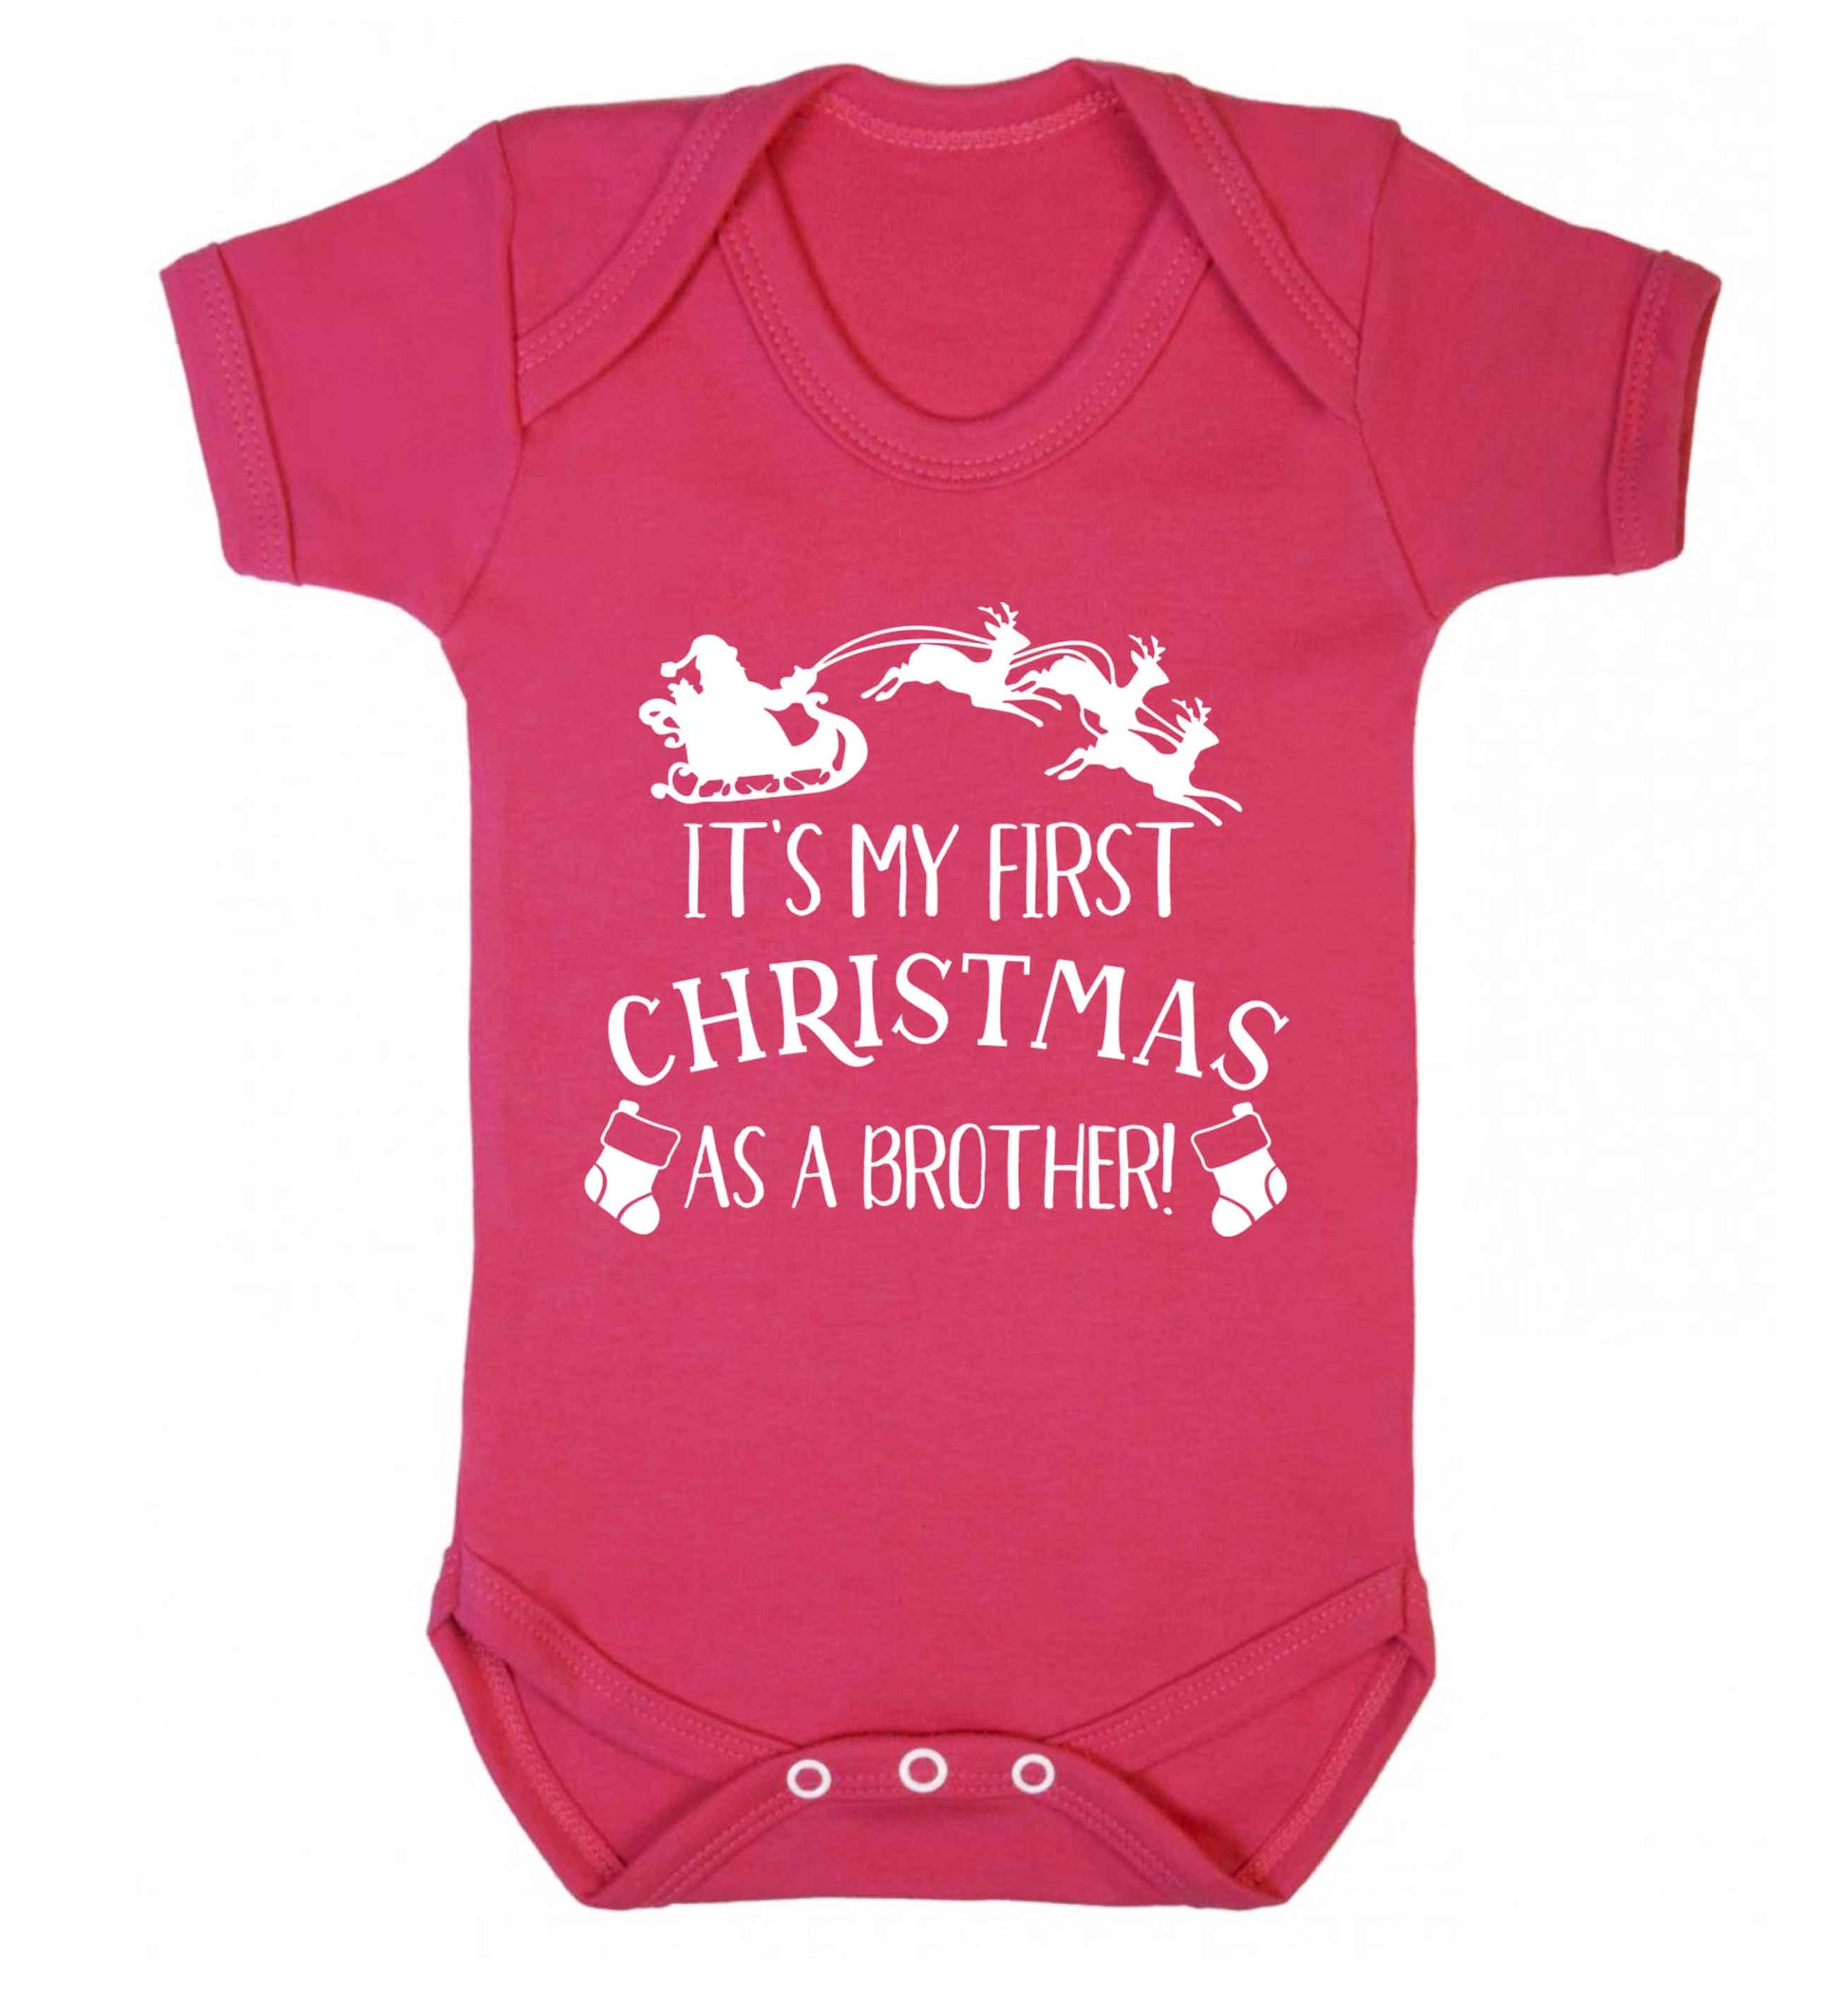 It's my first Christmas as a brother! Baby Vest dark pink 18-24 months